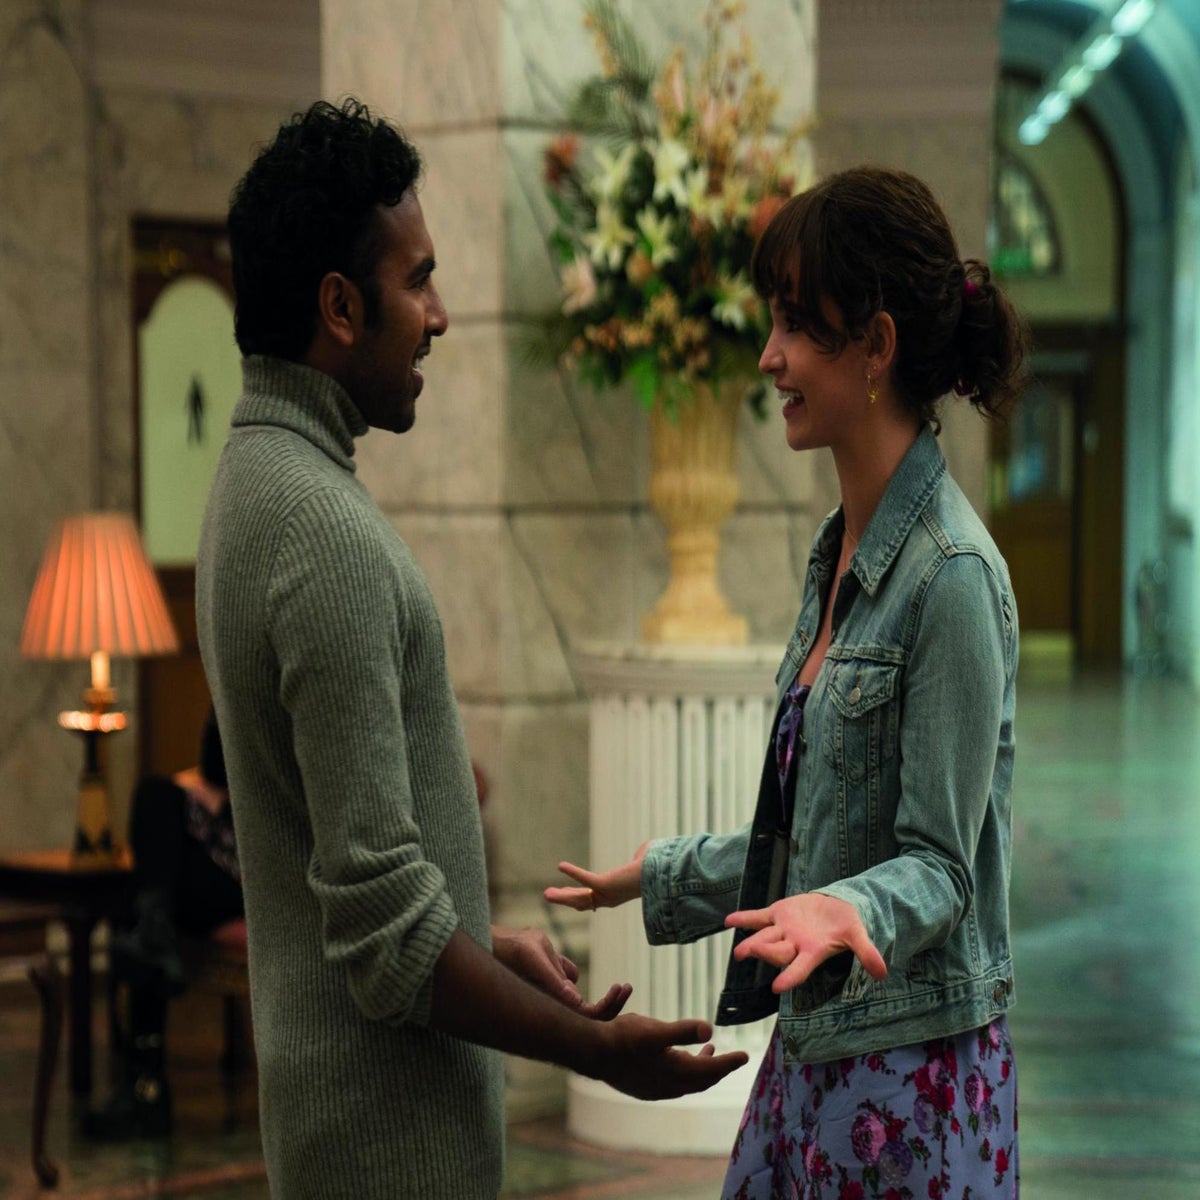 Yesterday movie review: Danny Boyle romcom written by Richard Curtis  imagines world without The Beatles